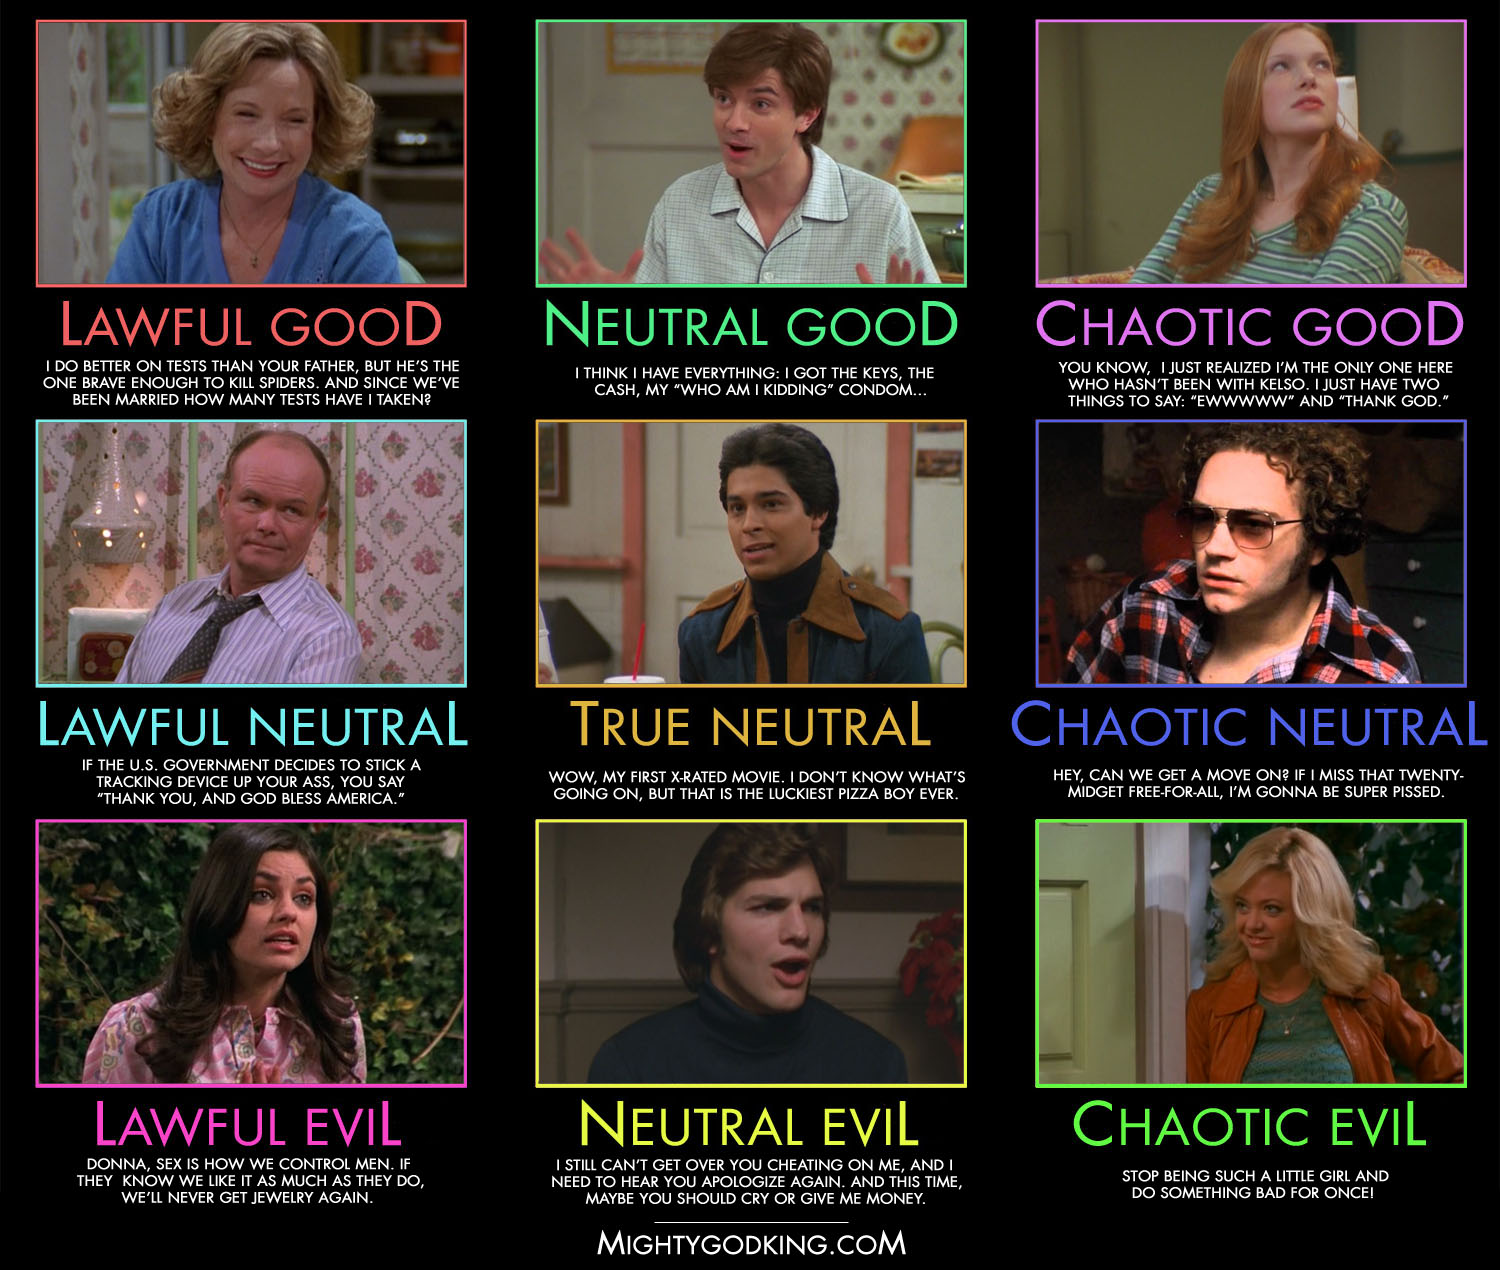 That Seventies Show Porn - Mightygodking dot com Â» Post Topic Â» ALIGNMENT CHART! That 70s Show